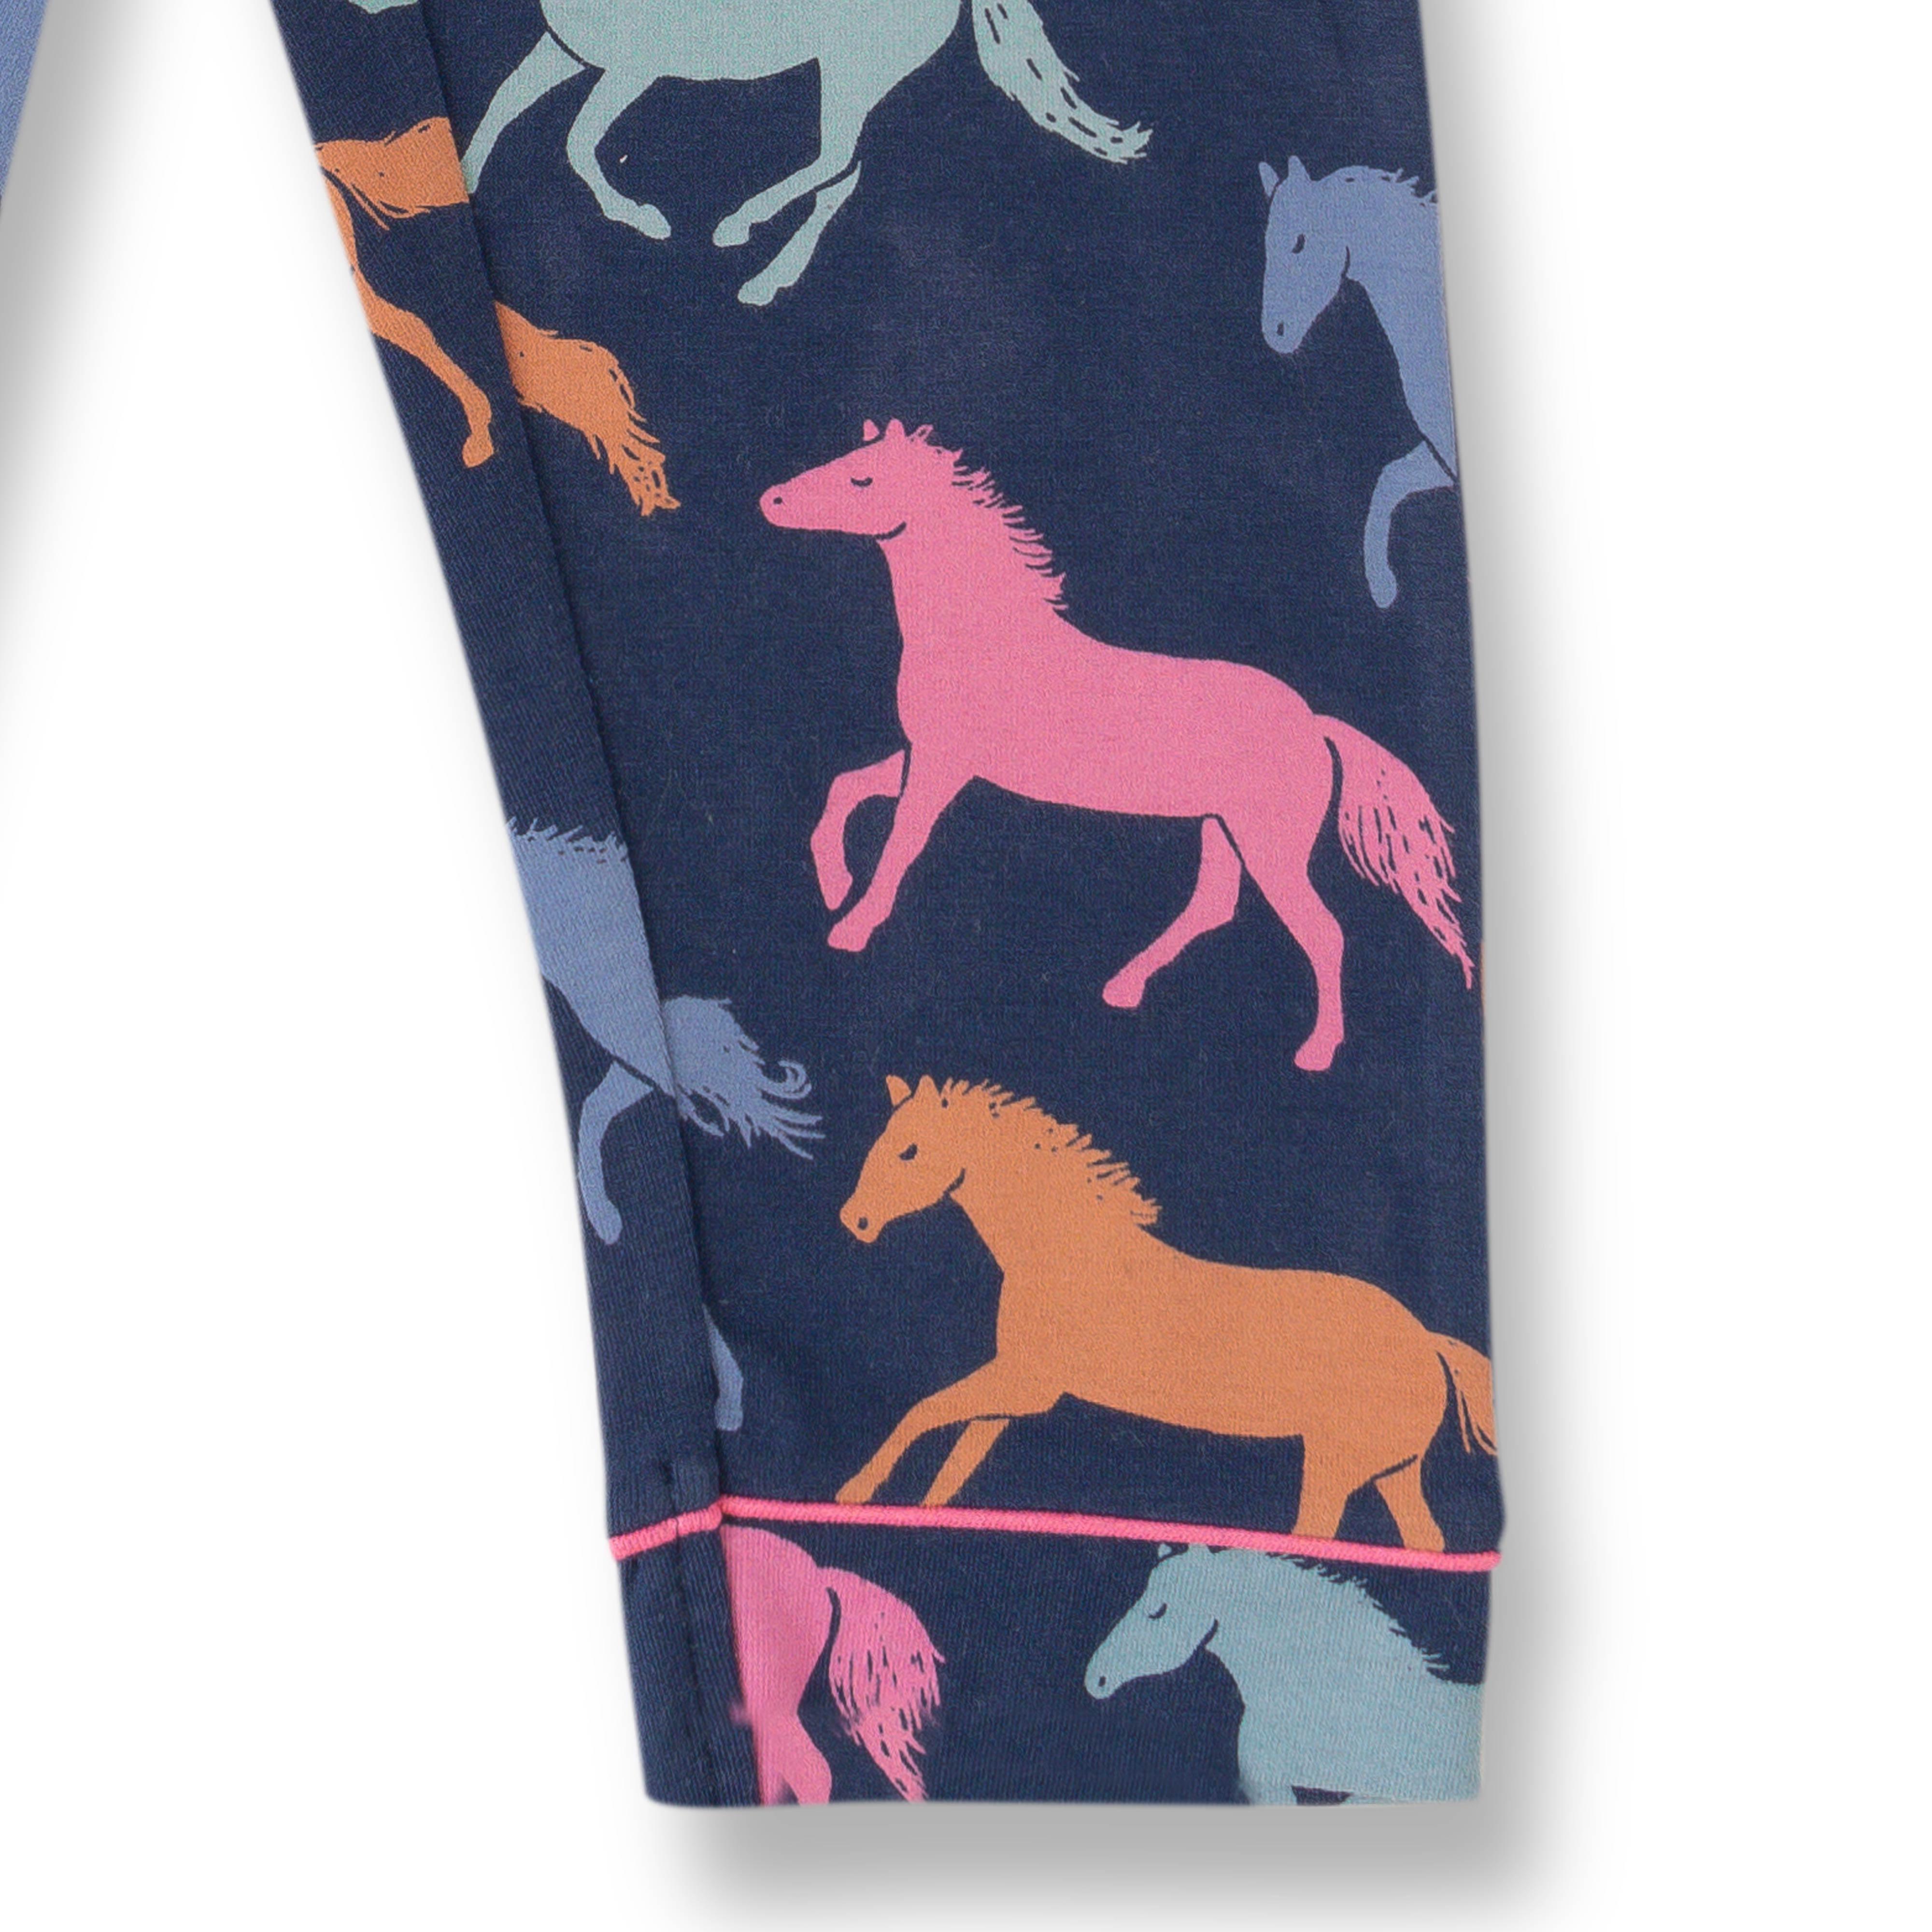 Baby Girls Top & Bottom All Over Horse Printed Nightwear - Juscubs